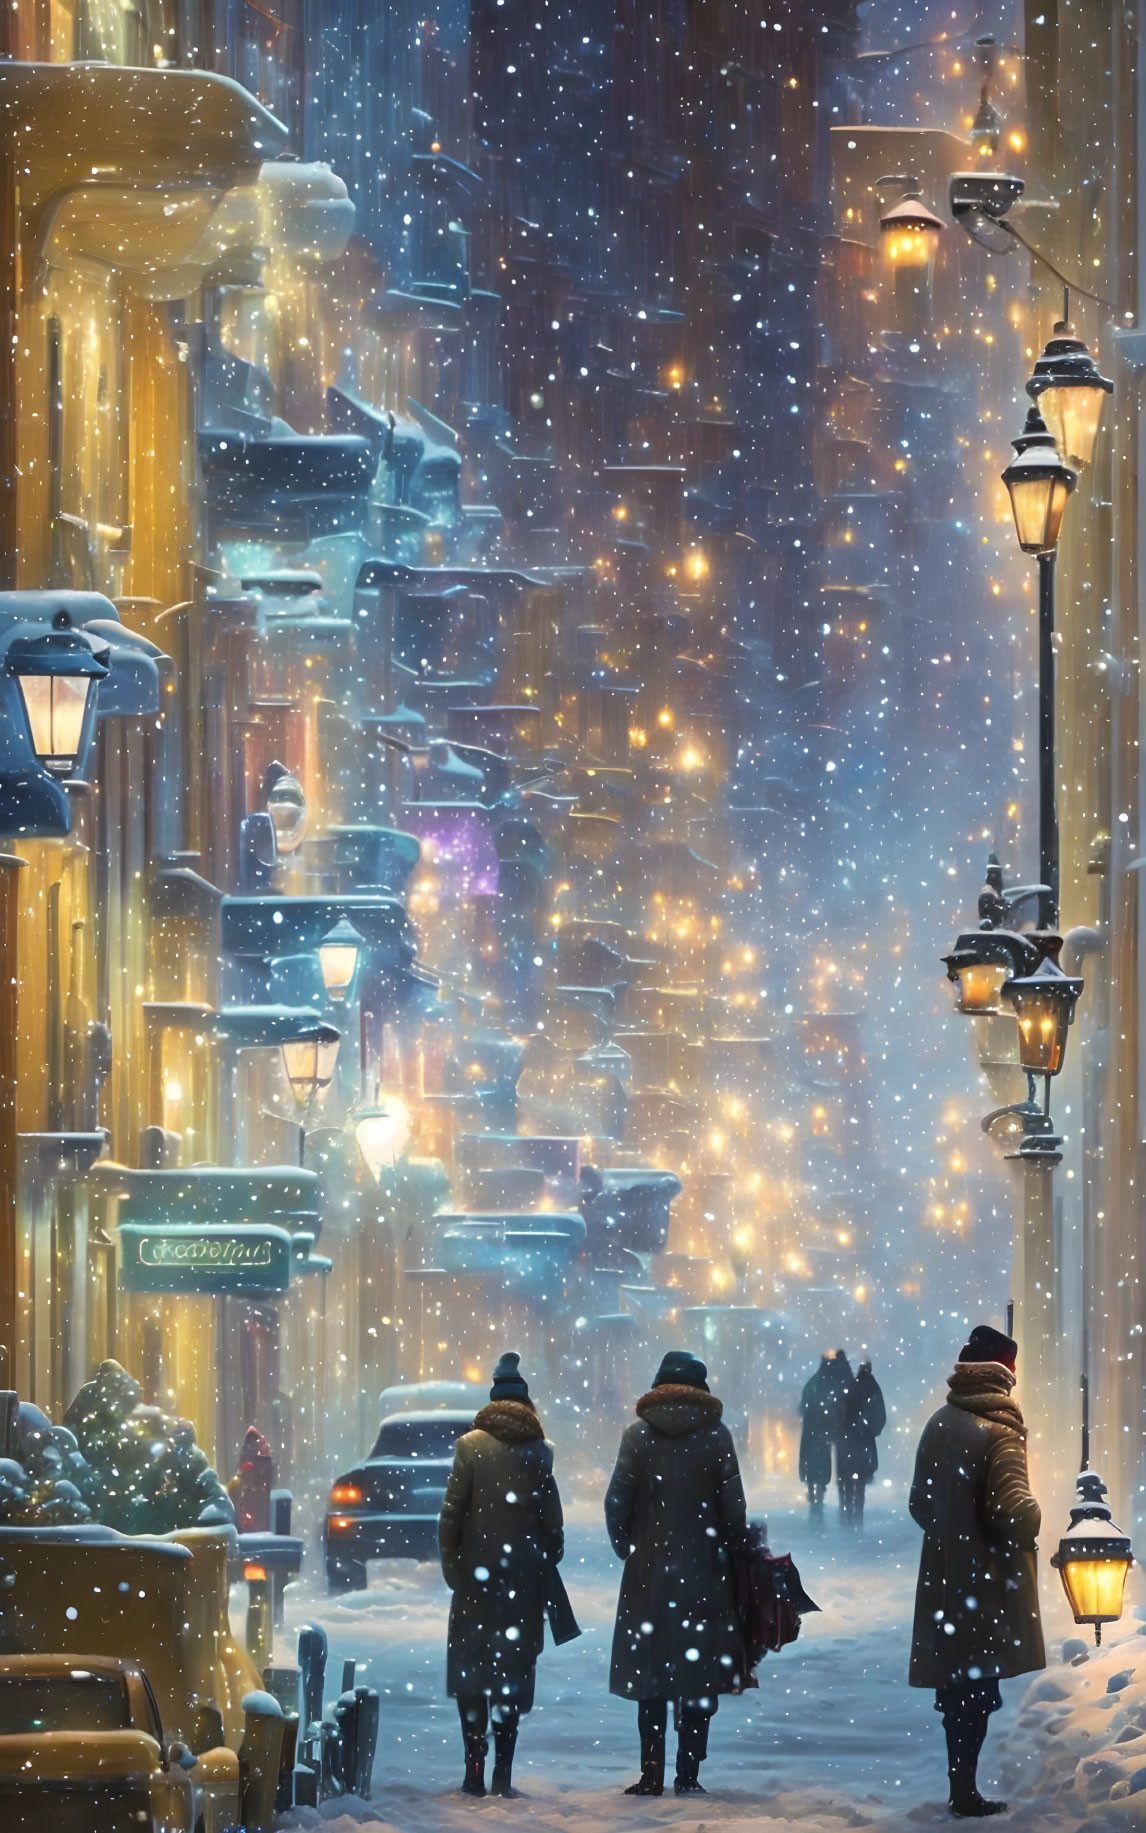 Snowy city street at dusk with illuminated lamps and festive lights